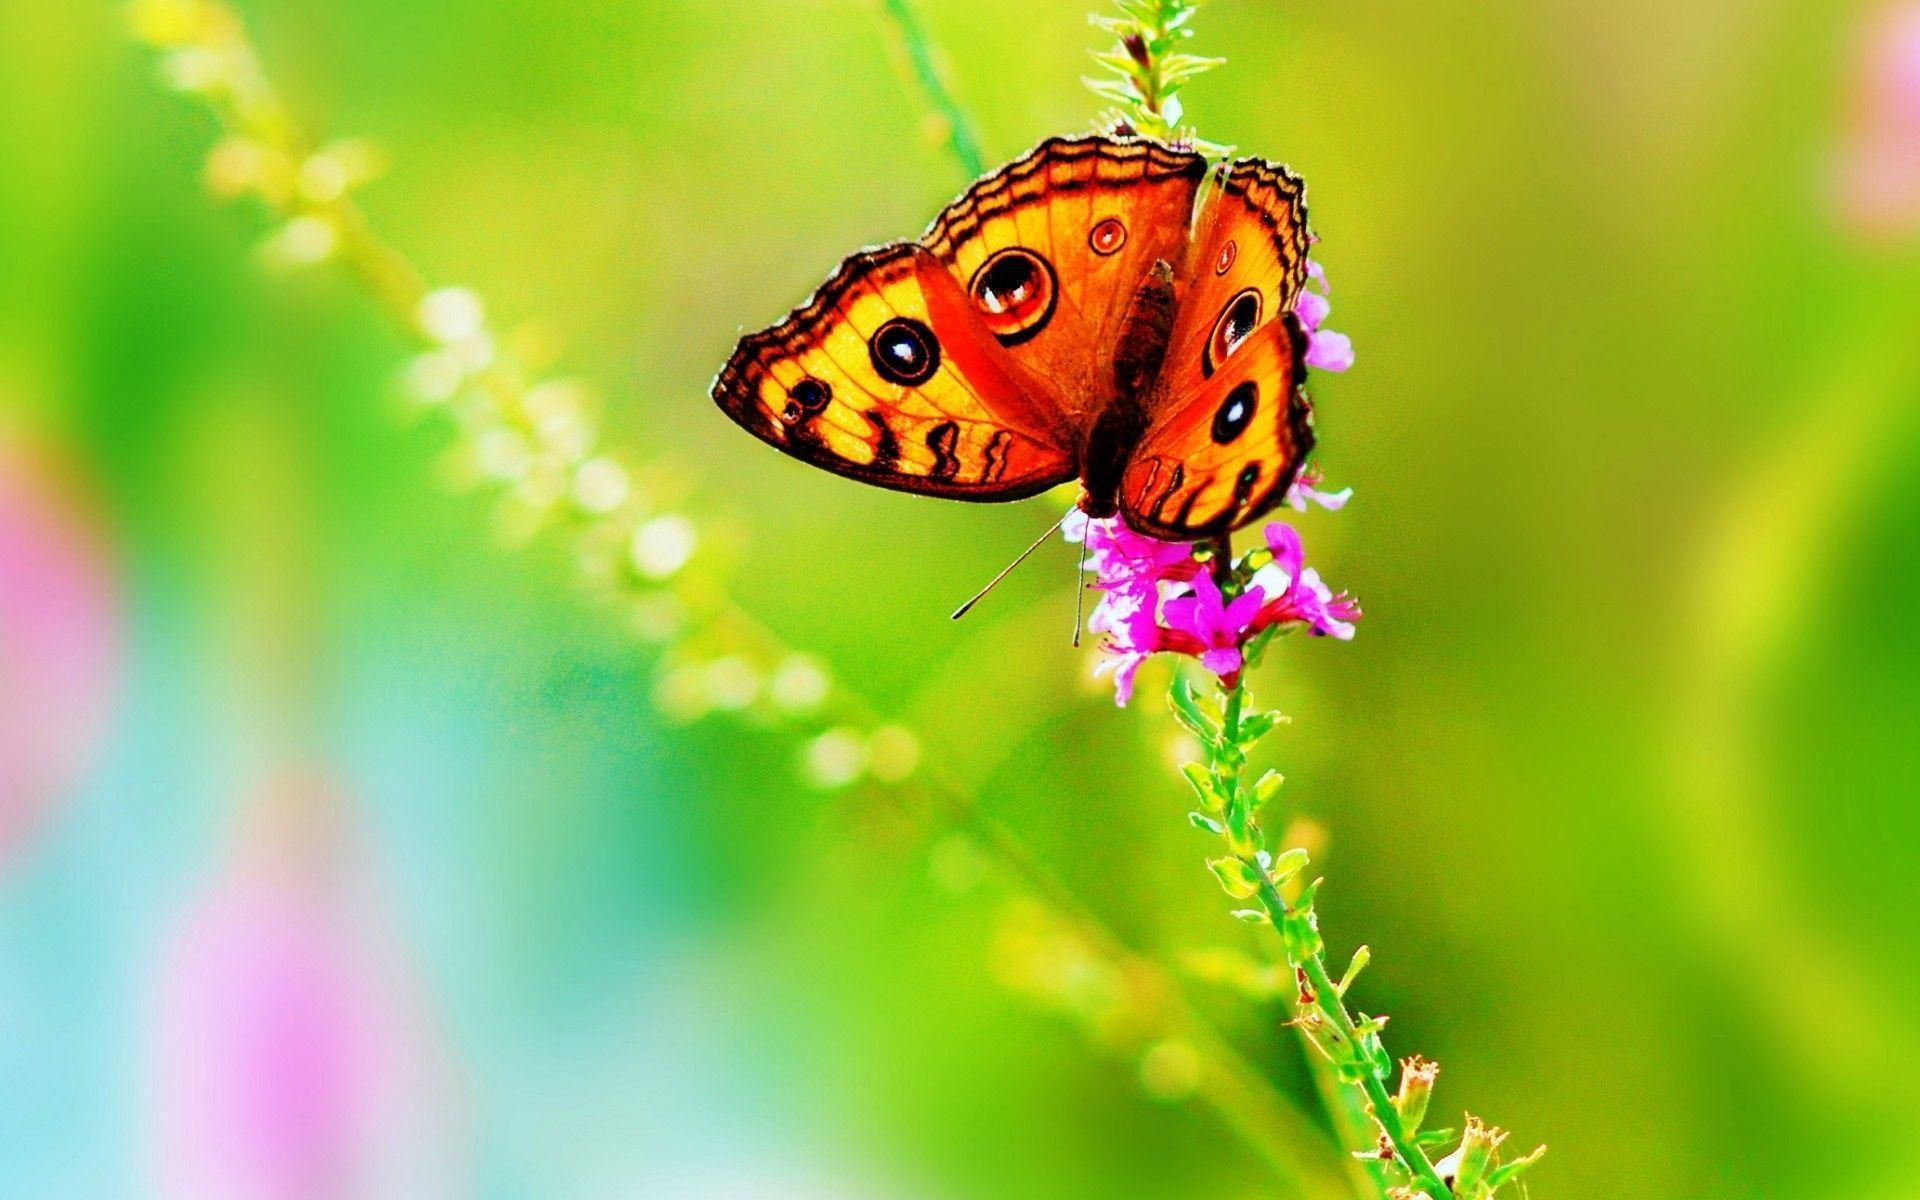 25 Top wallpaper for desktop butterfly You Can Download It Without A ...